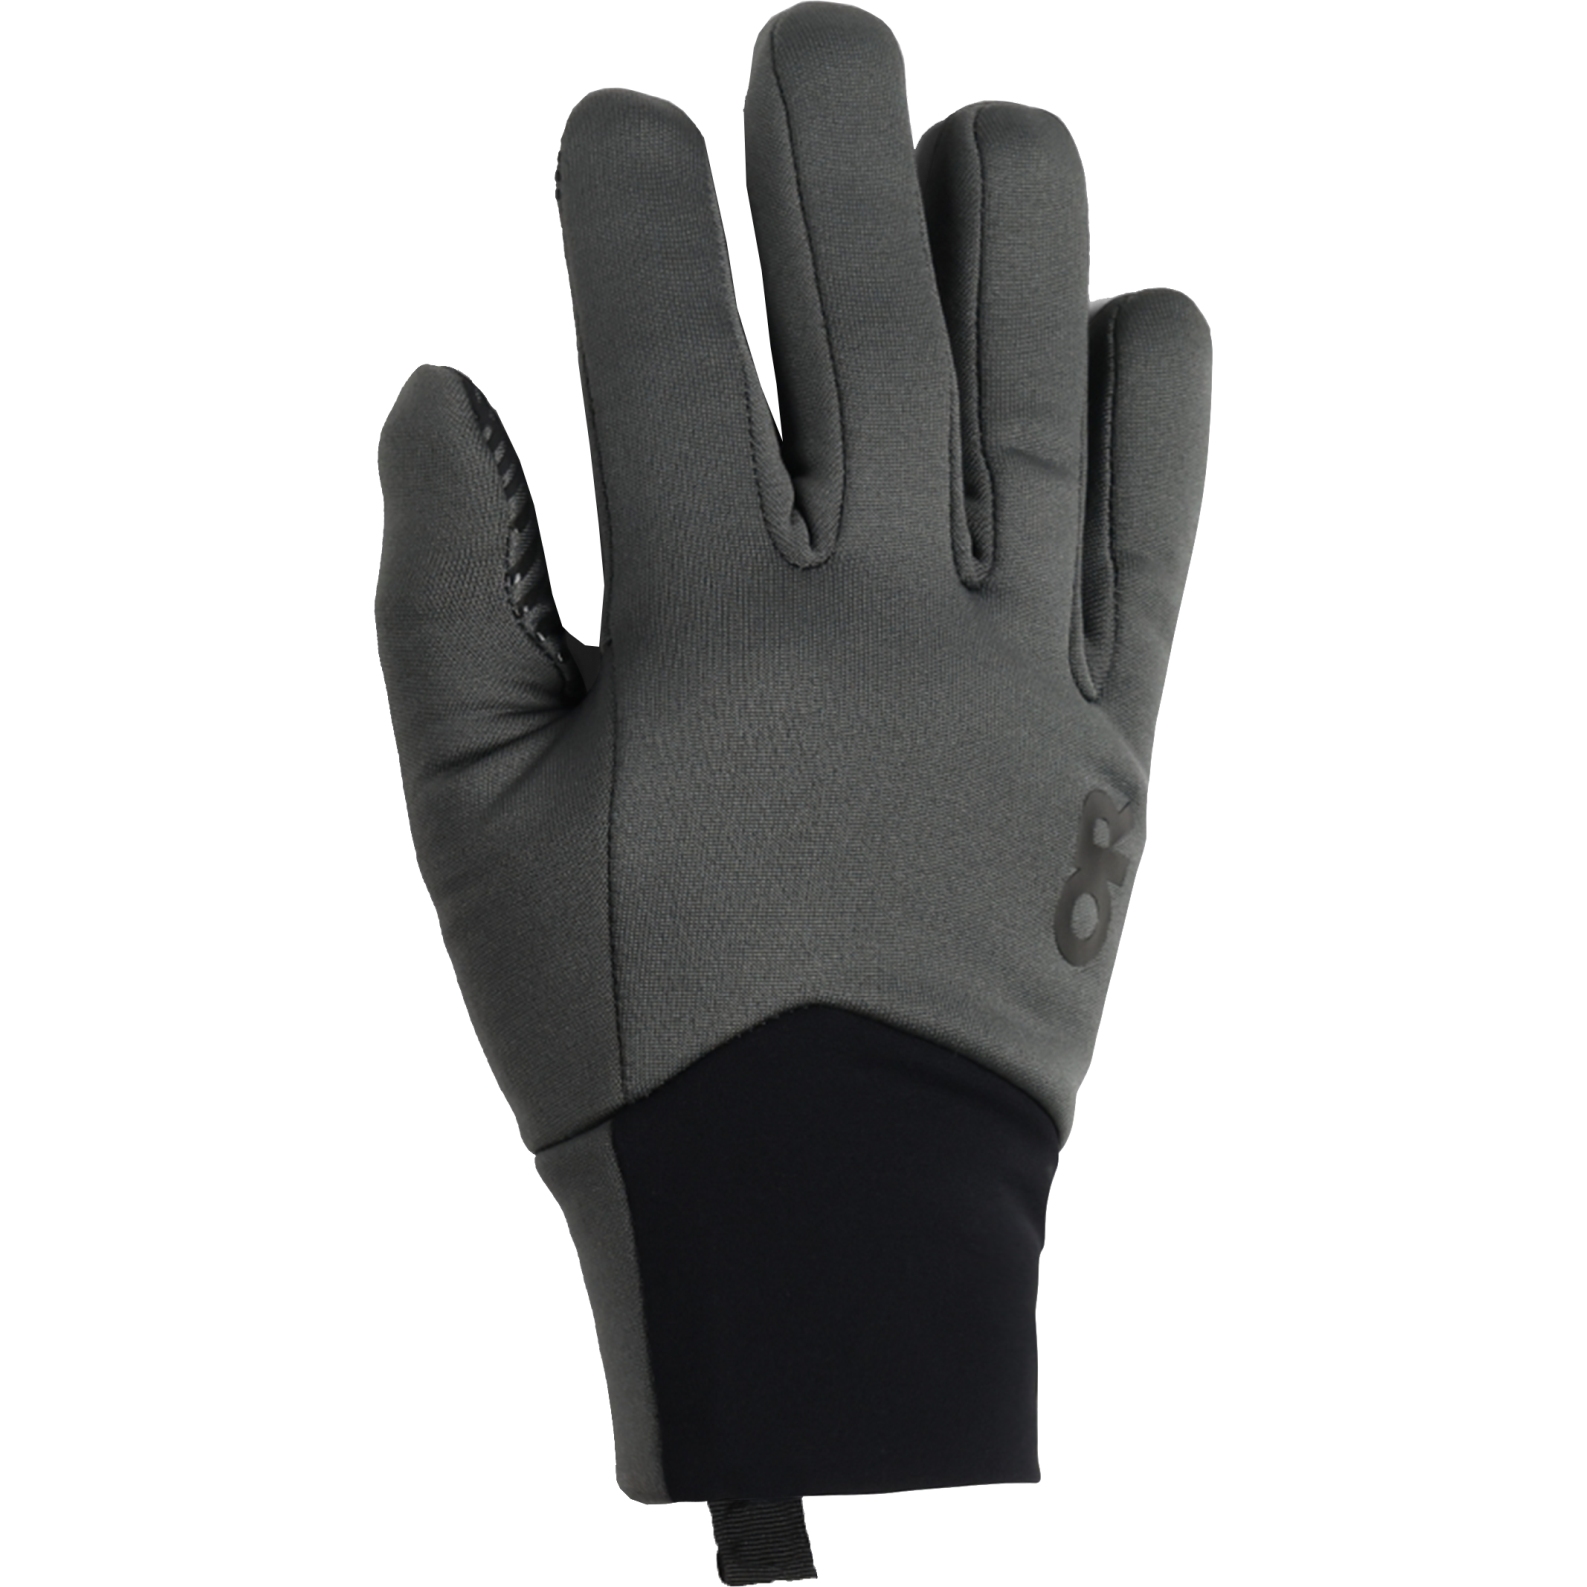 Image of Outdoor Research Men's Vigor Midweight Sensor Gloves - charcoal